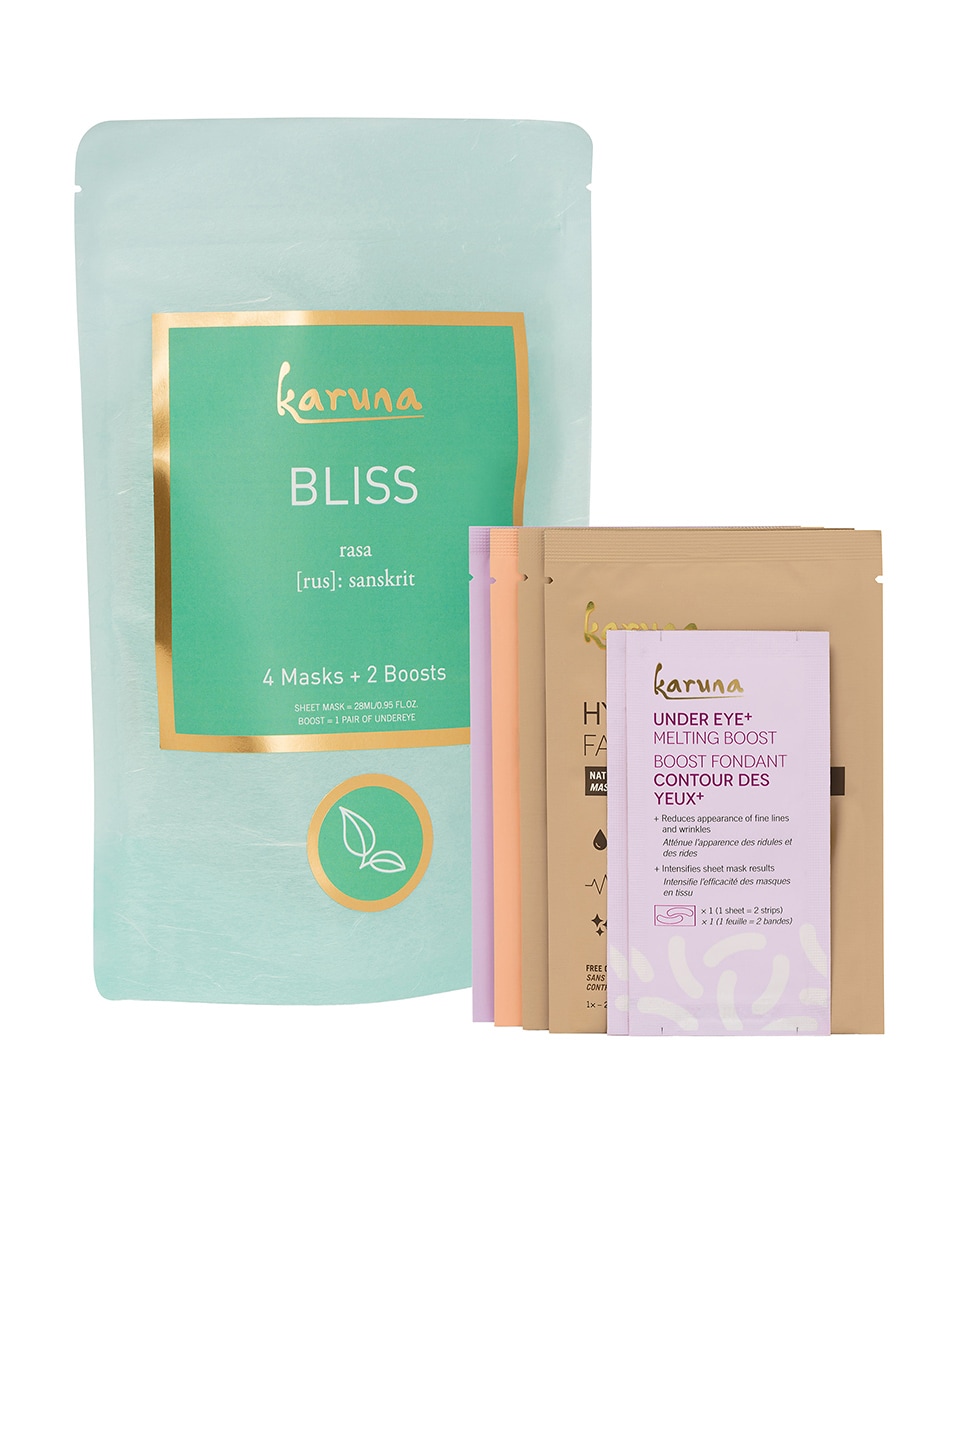 Karuna Bliss Compassion Set In N,a